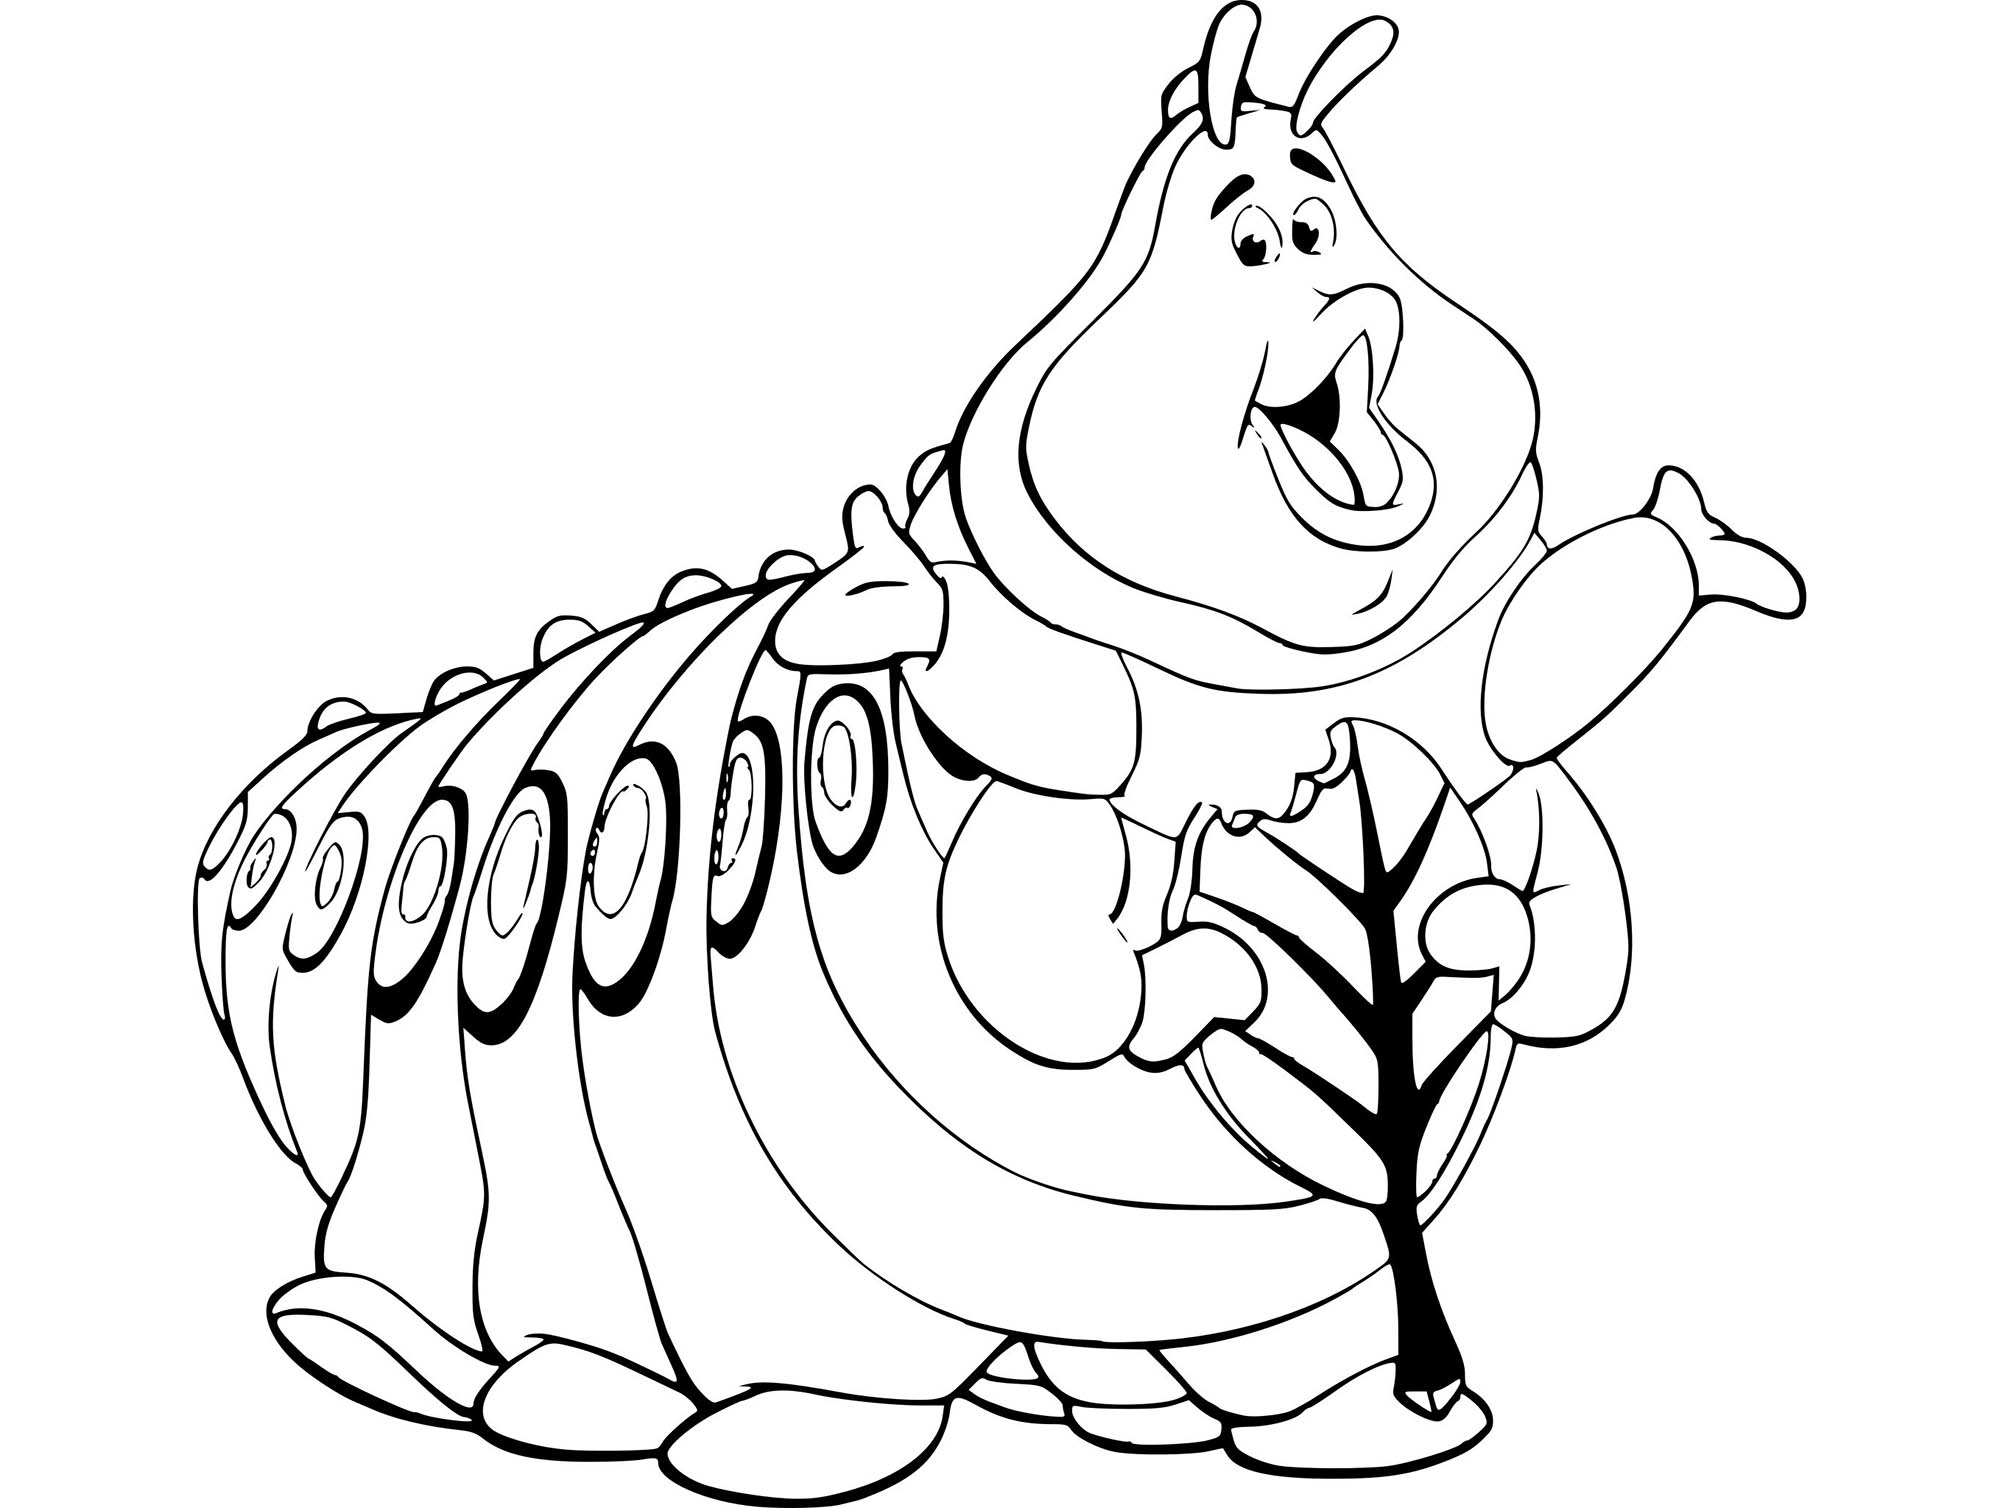 This big caterpillar is inviting you to color it!